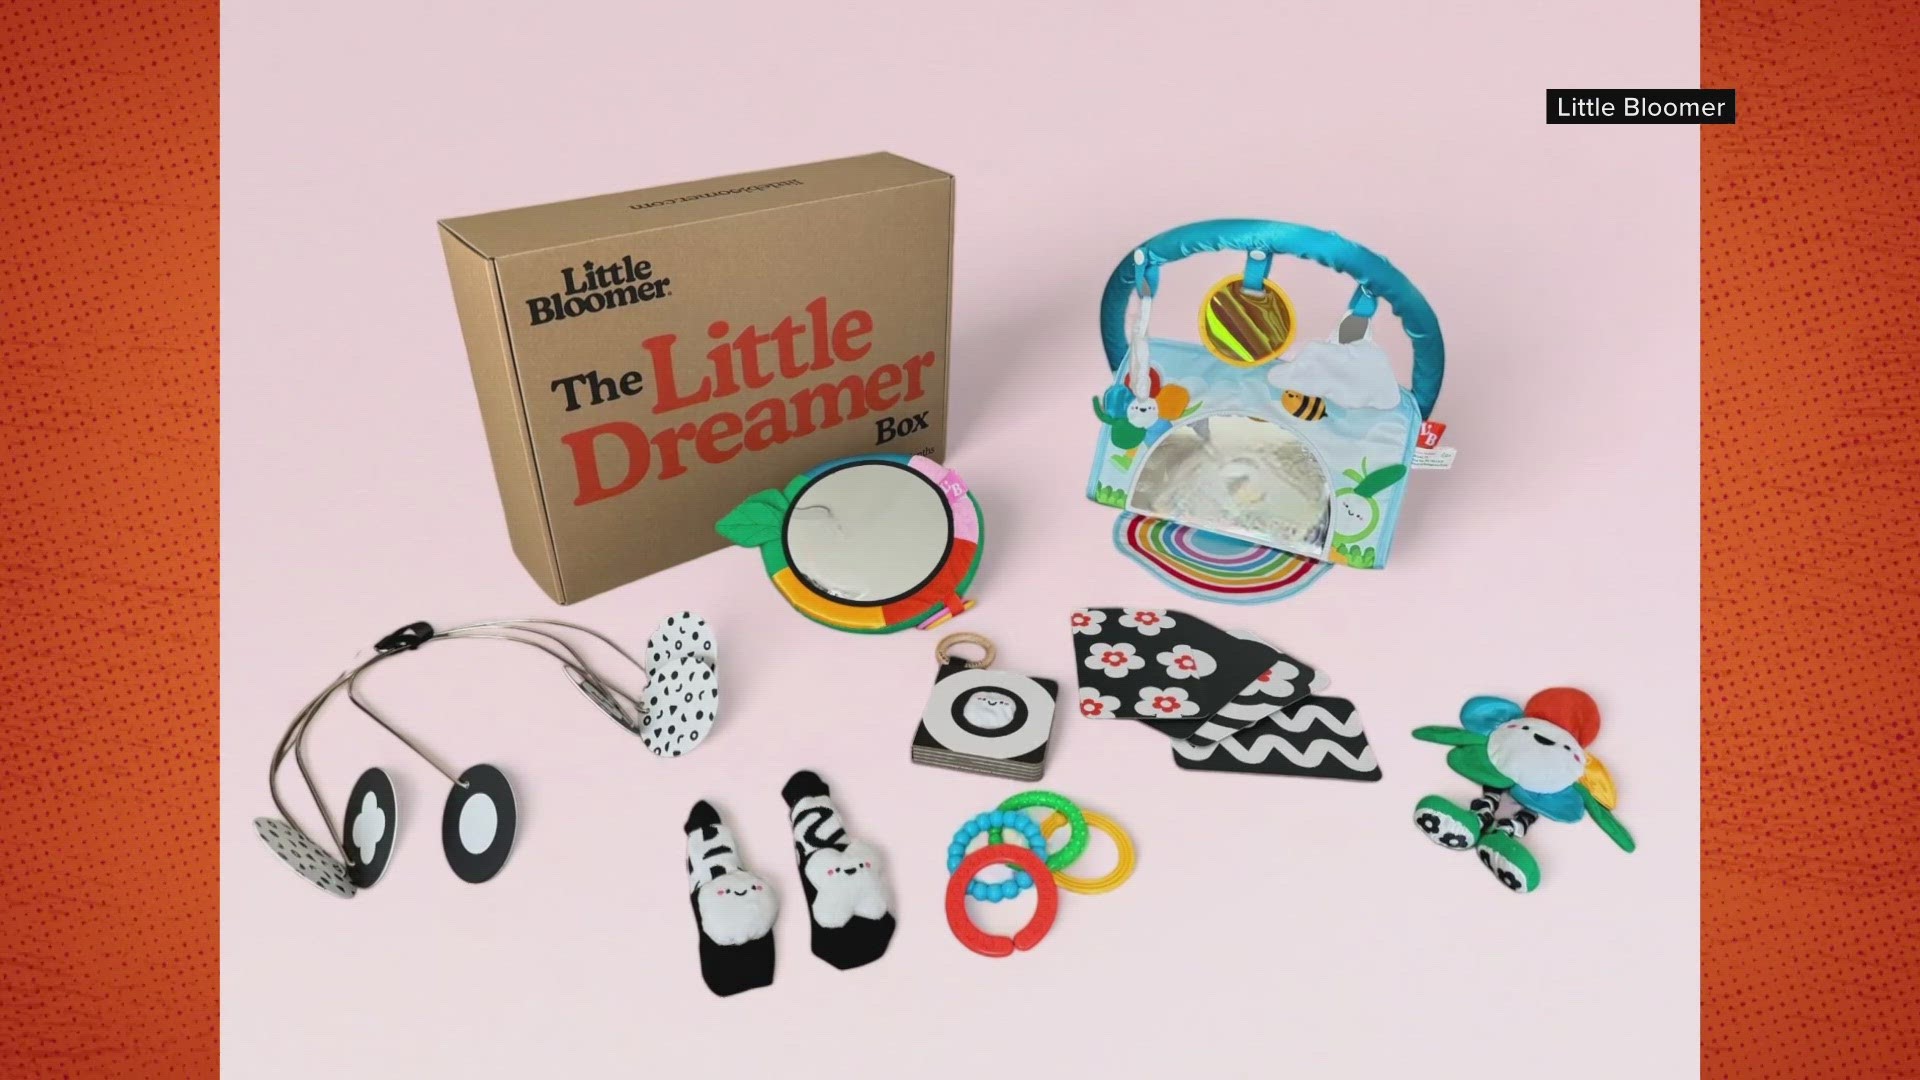 The toy company curates toy boxes crafted by play experts.